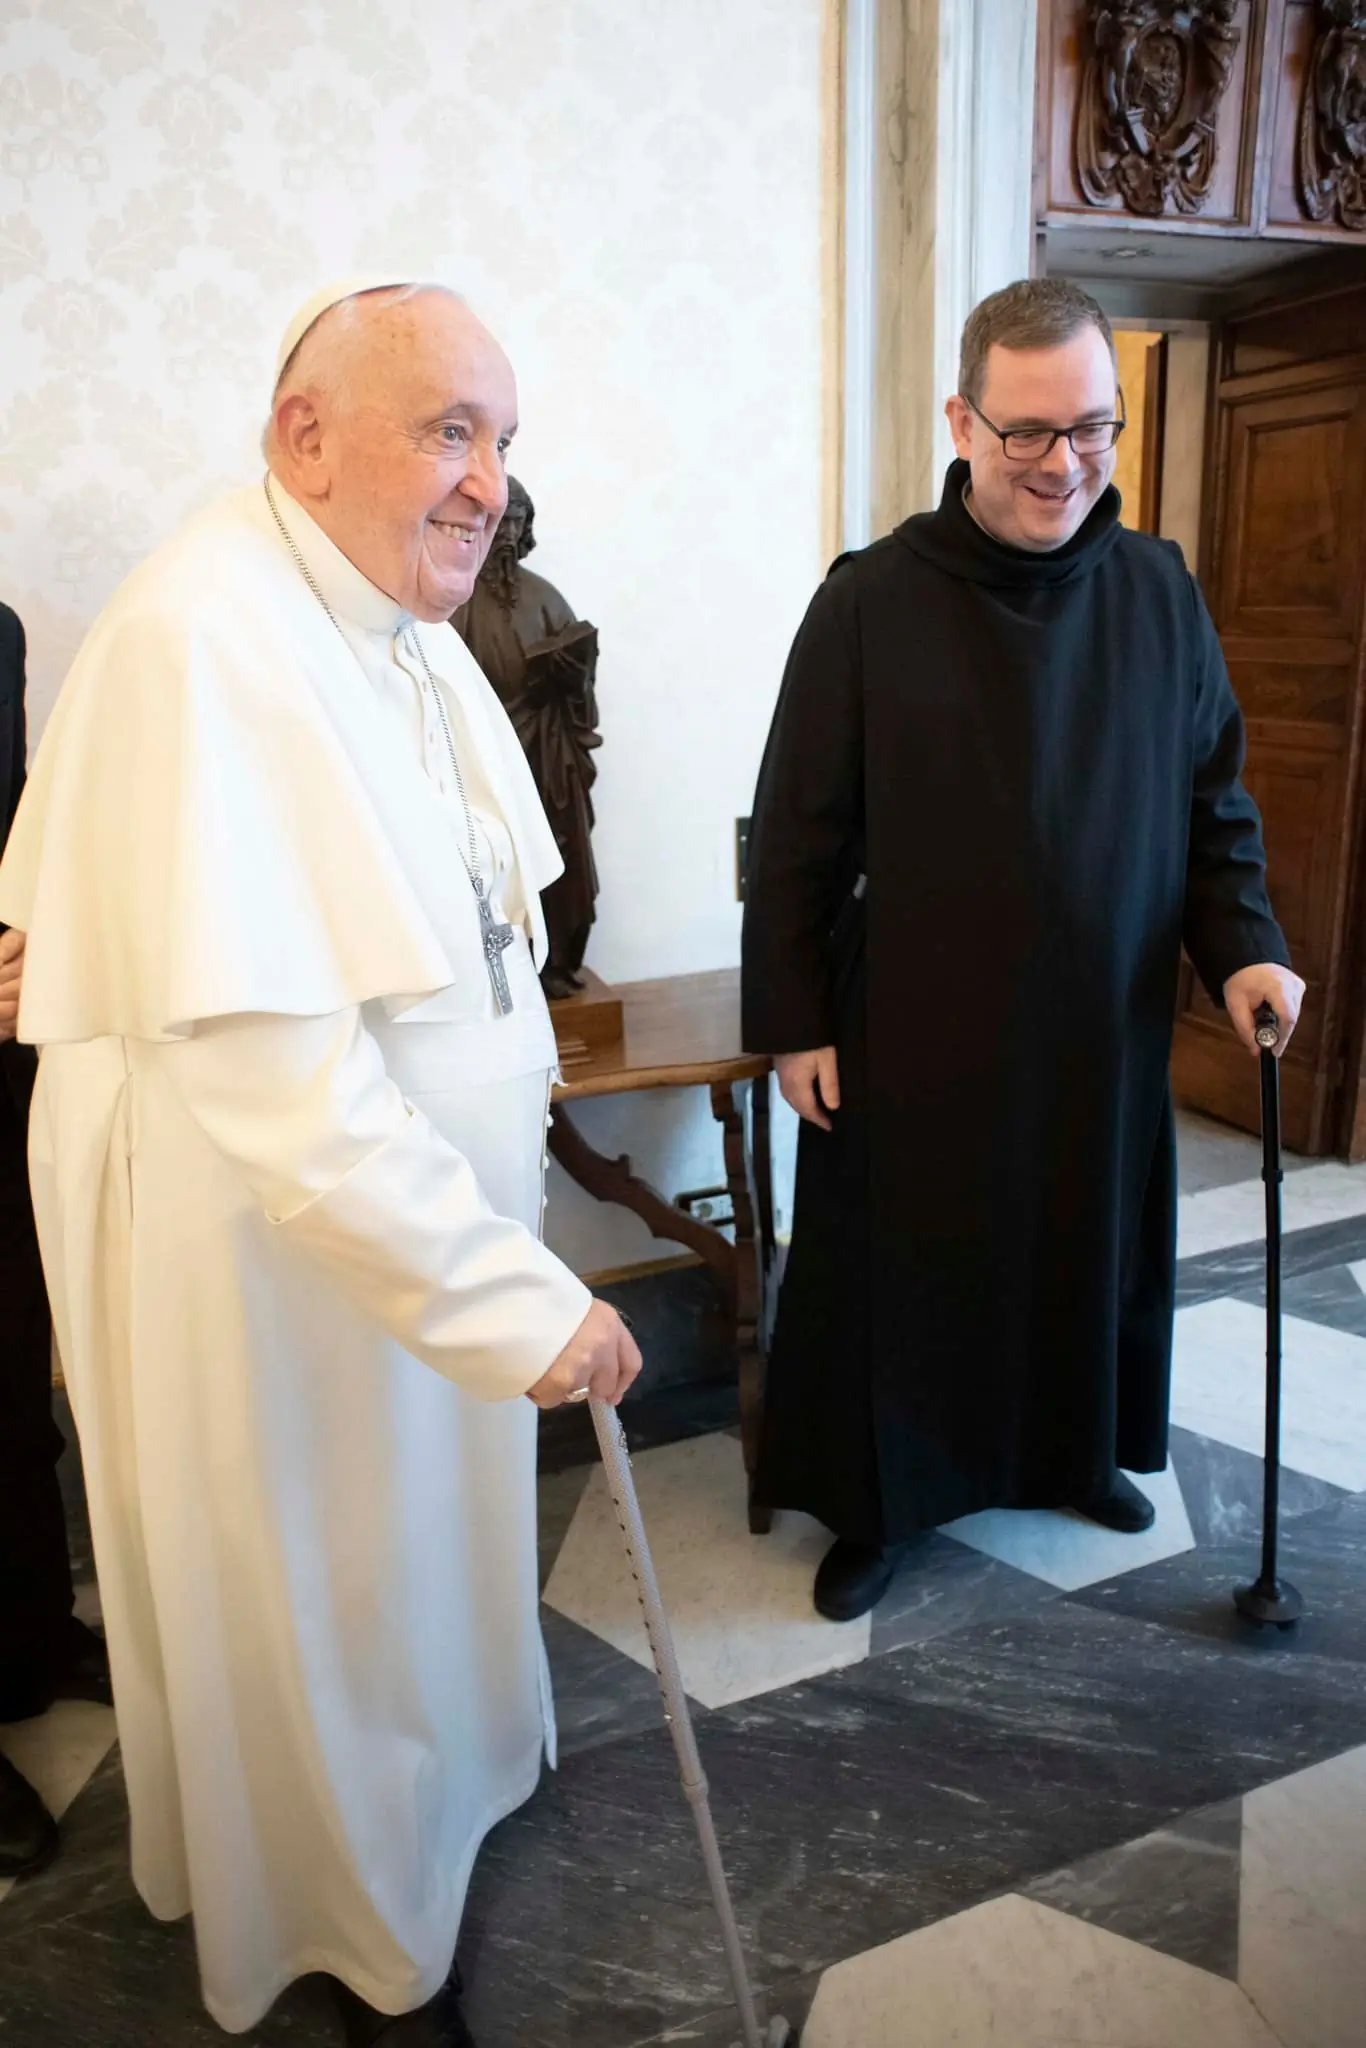 Fr Martin Browne, staff responsible for Anglican-Catholic relations at the Dicastery for the Promotion of Christian Unity, compares canes with Pope Francis during the visit of Archbishop of York, Stephen Cottrell